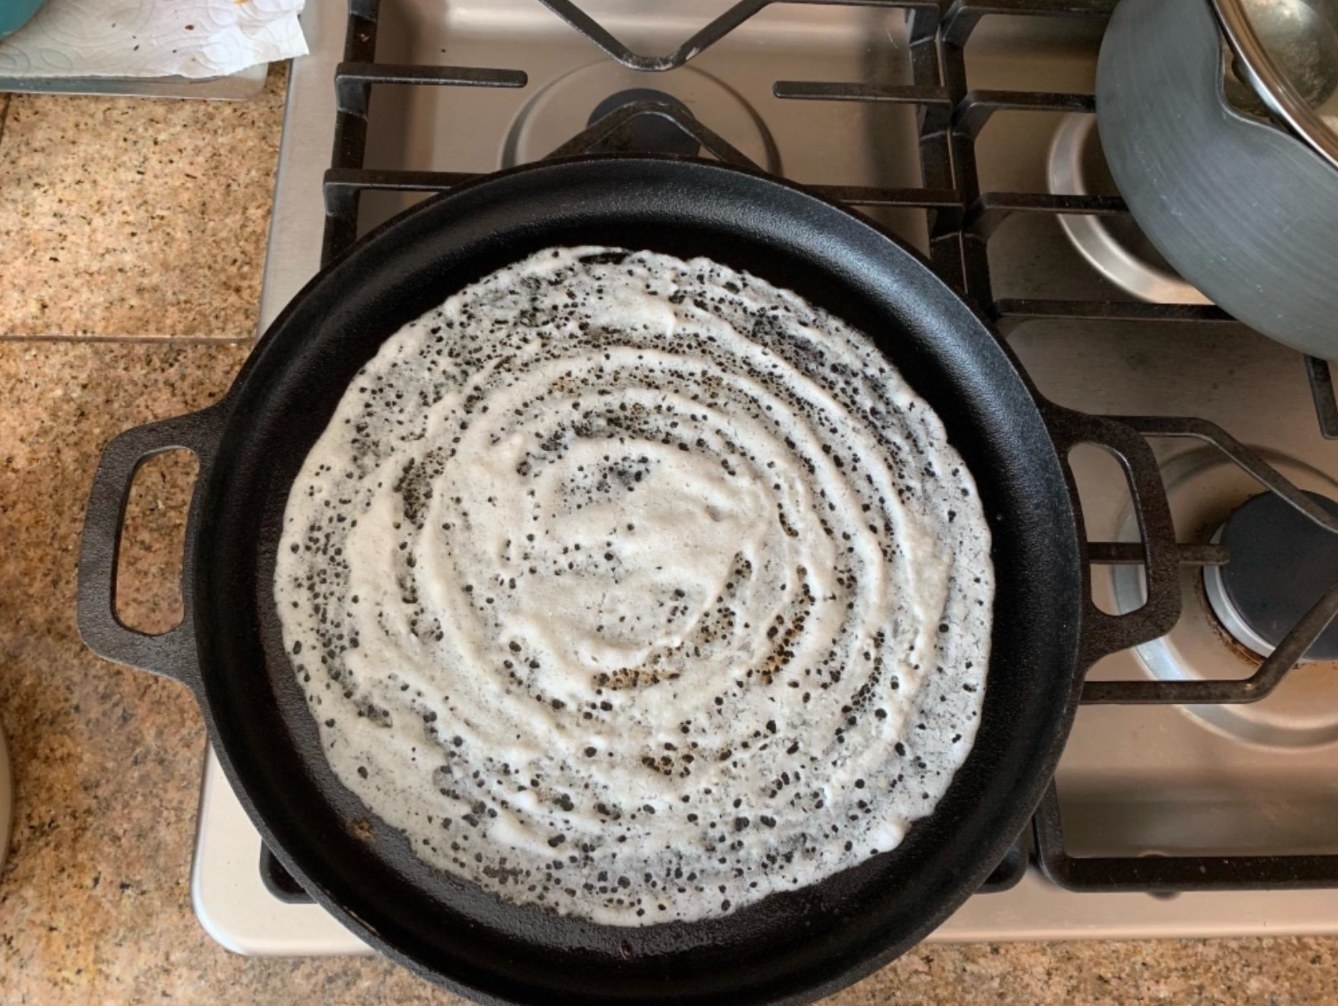 The six-piece cast iron cookware set being used by a reviewer to make dosas